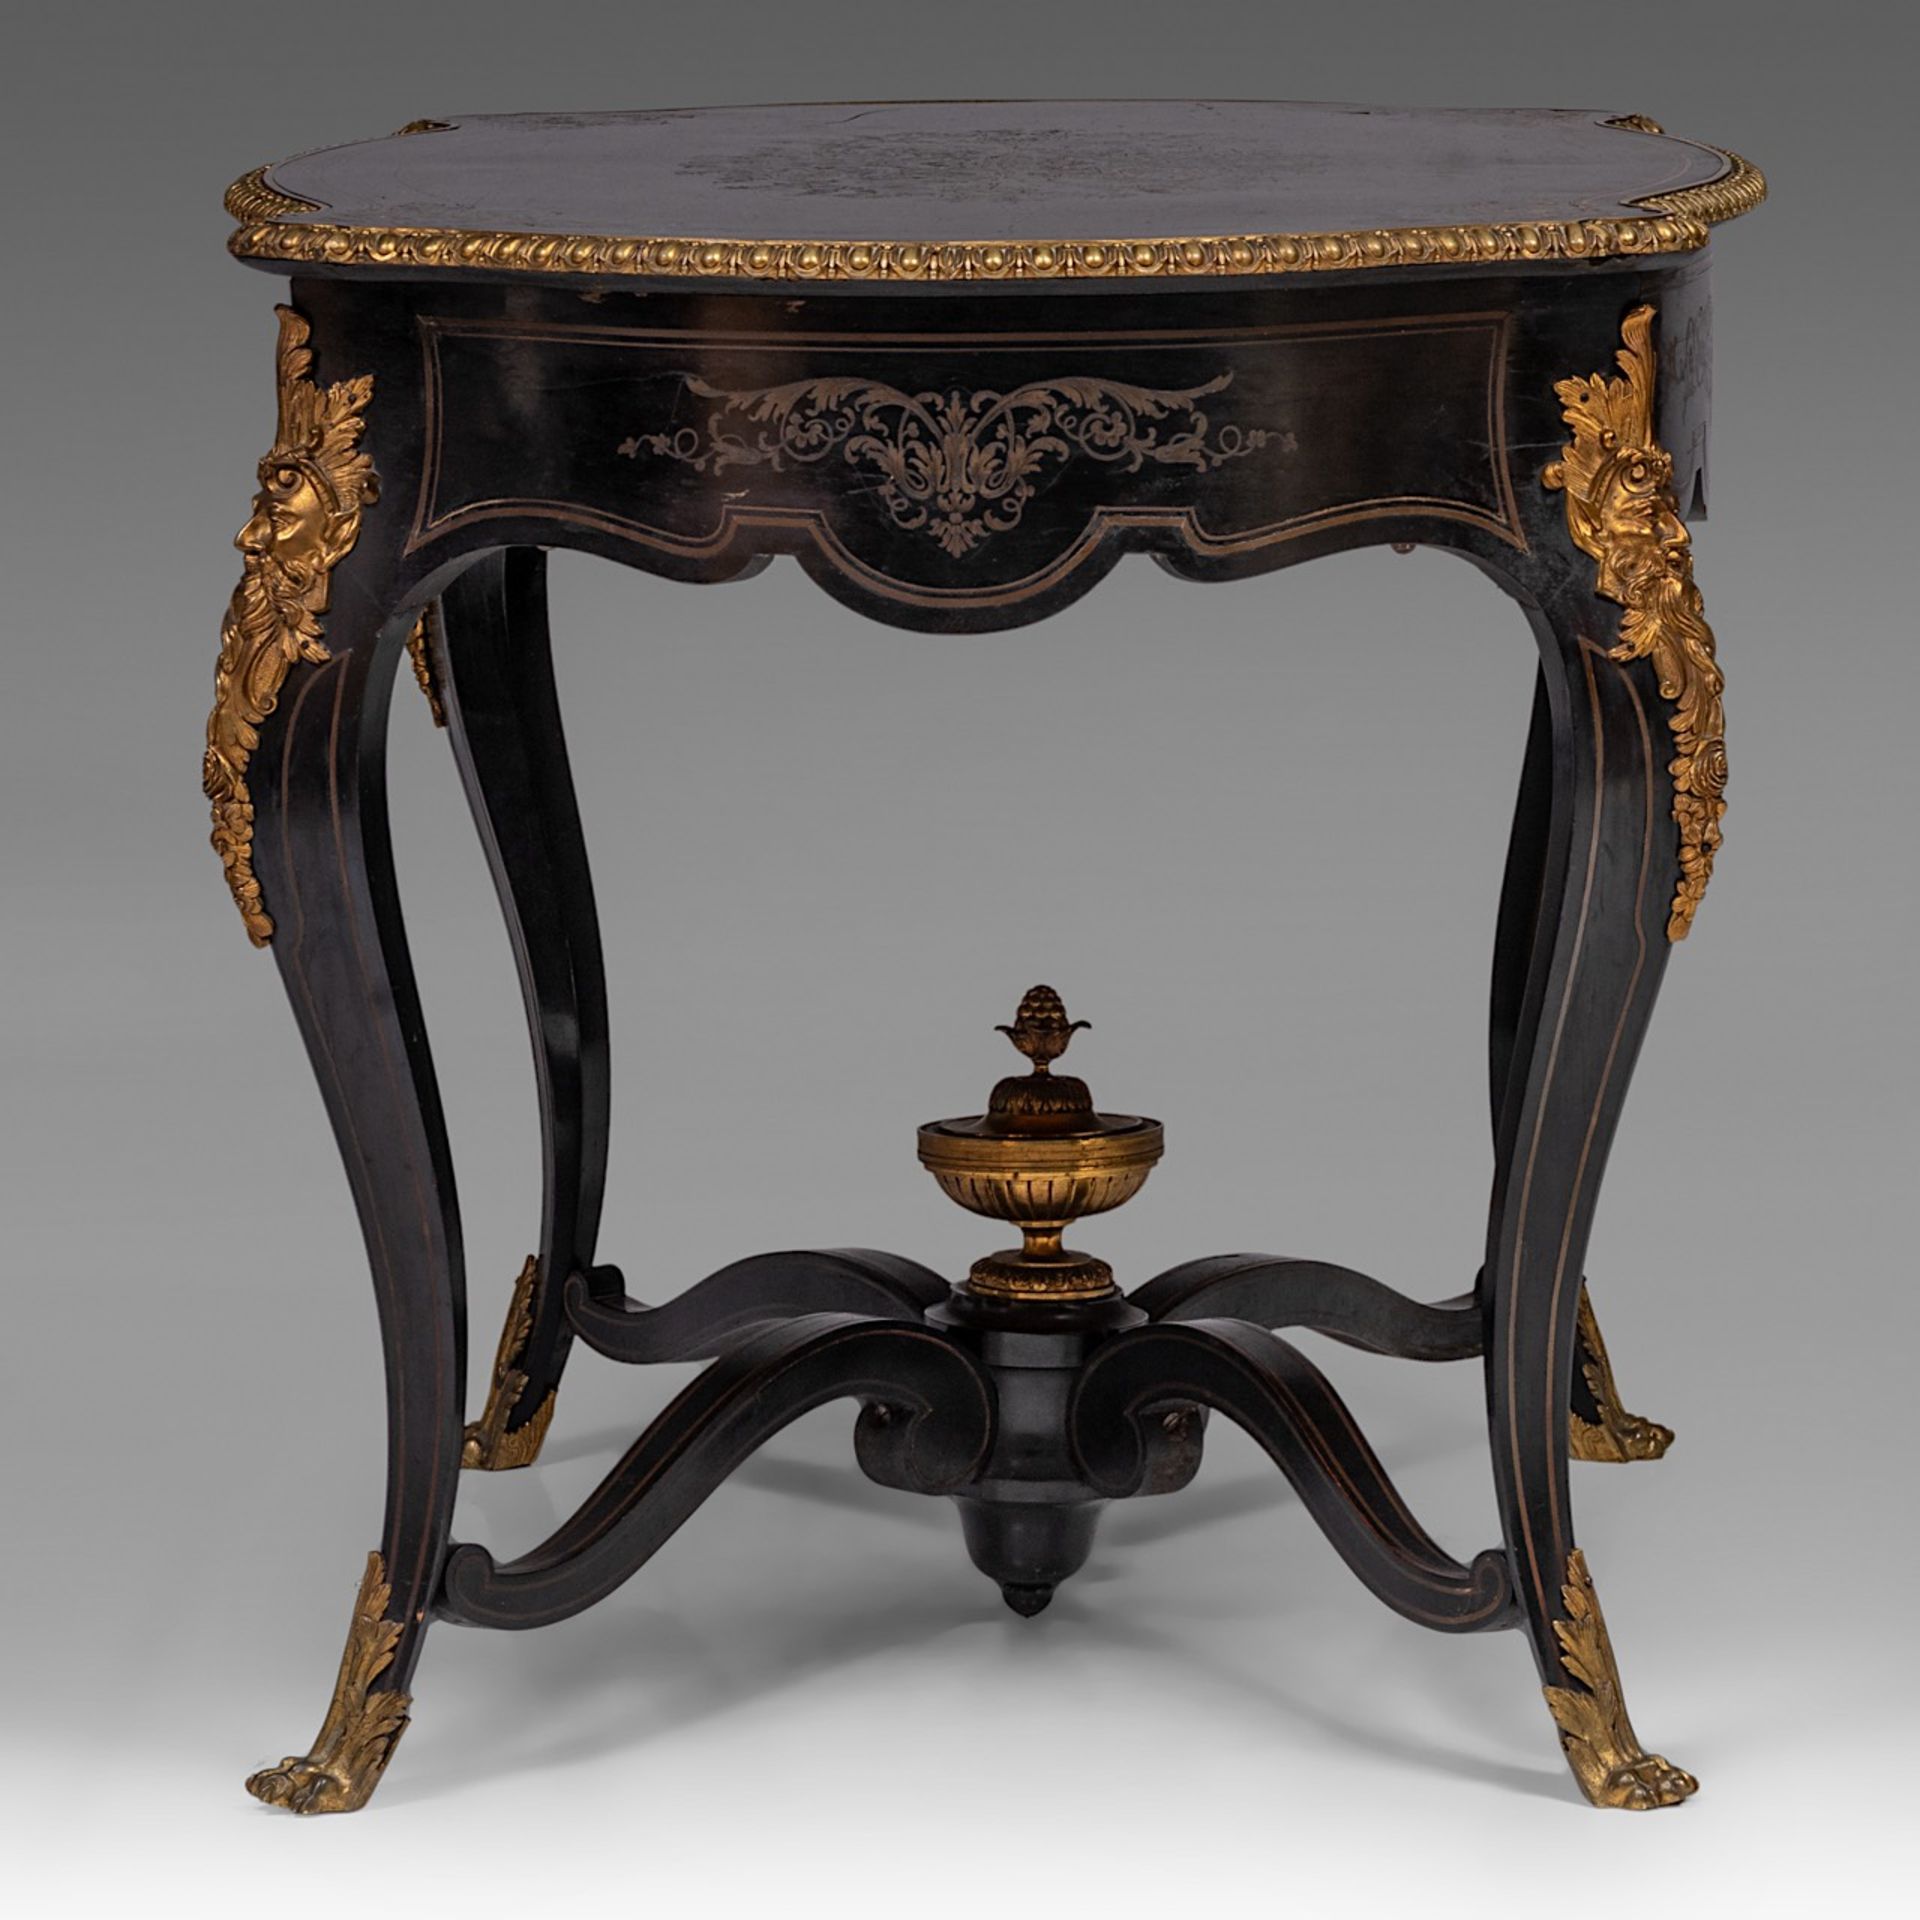 A Napoleon III (1852-1870) Boulle centre table, stamped 'HPR' Henri Picard (1840-1890), H 75 - W 120 - Bild 5 aus 10